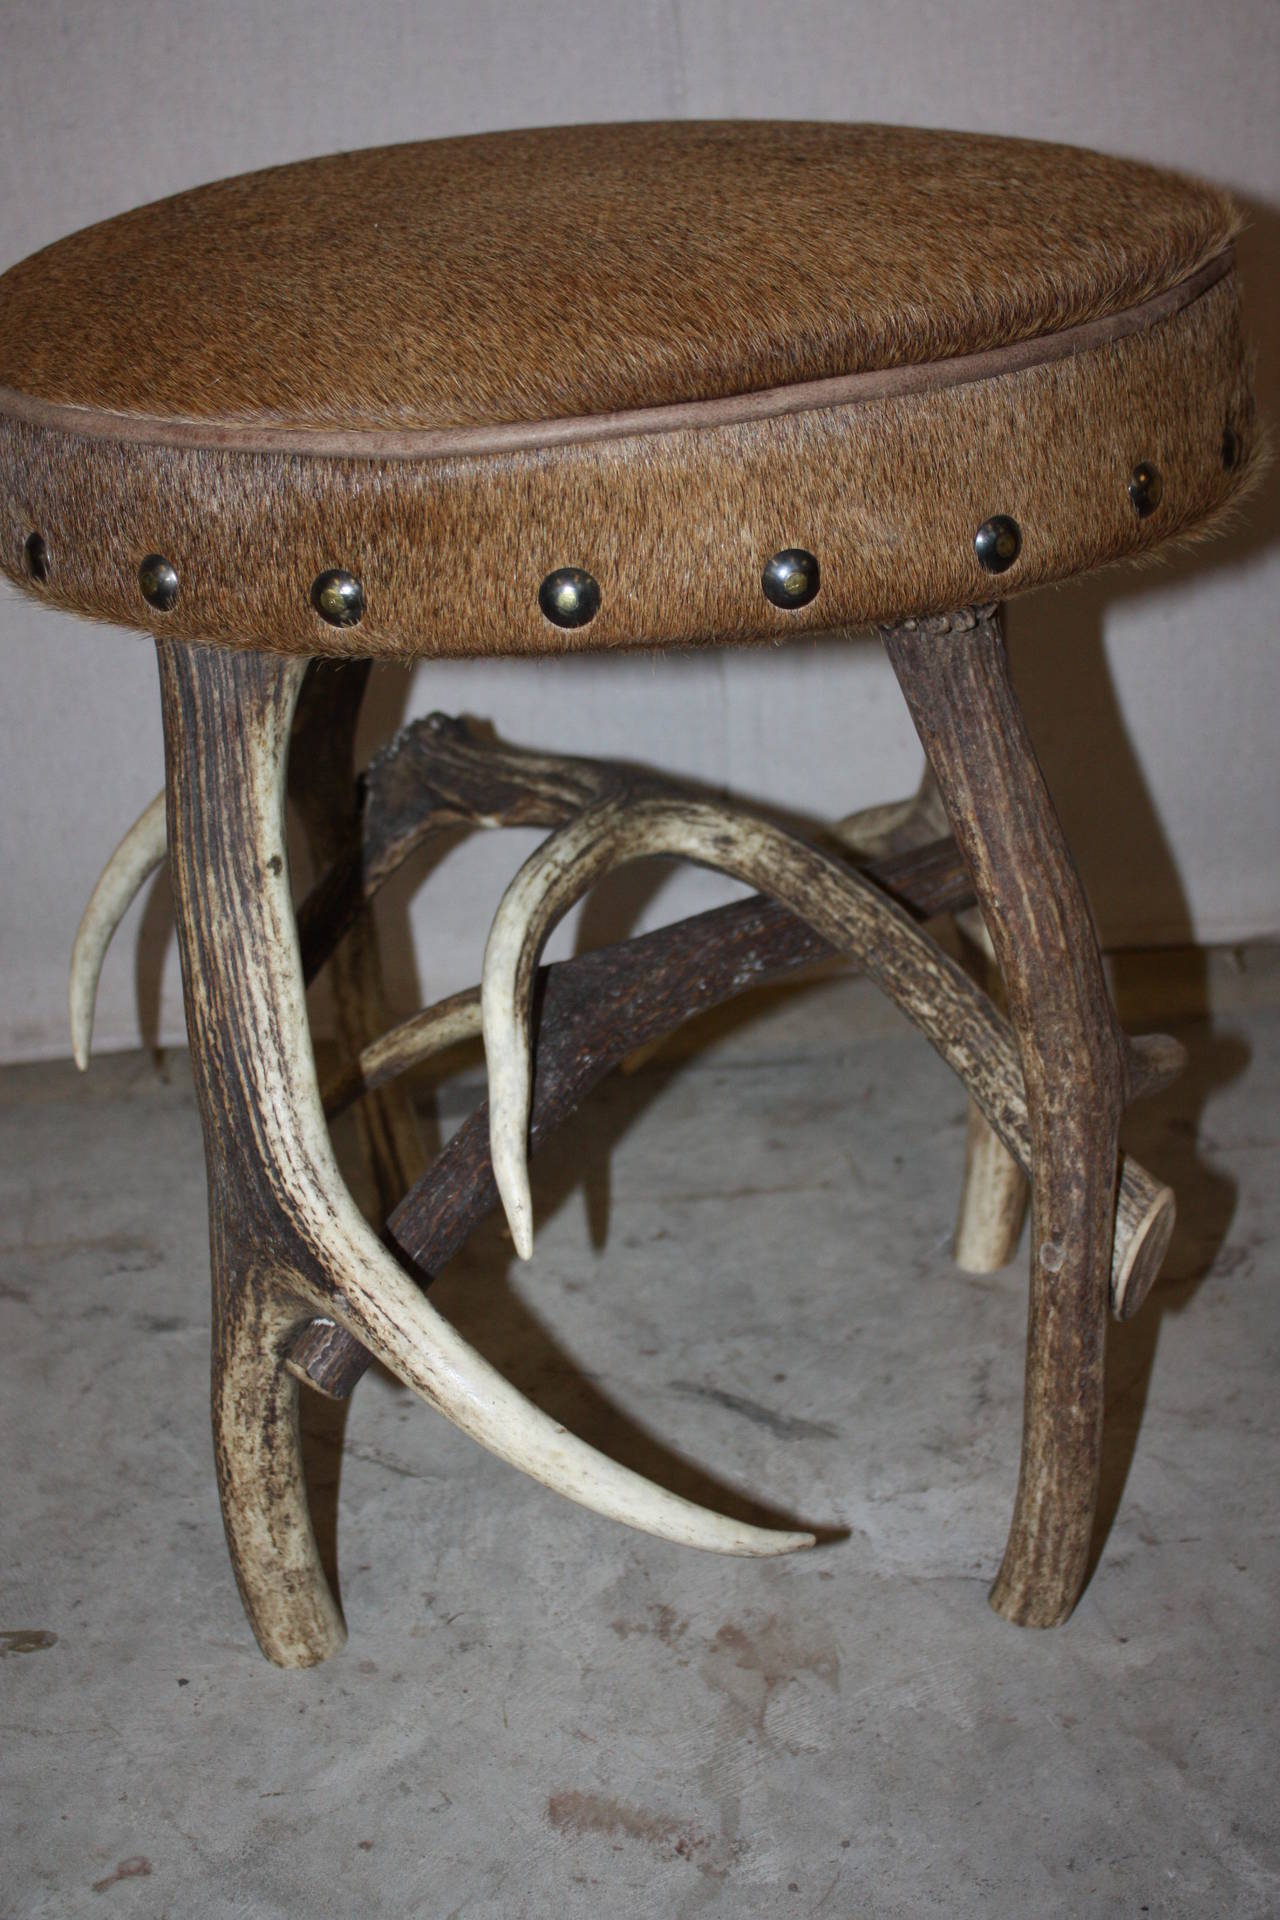 English Stag Horn Based Stool with Hide Upholstery